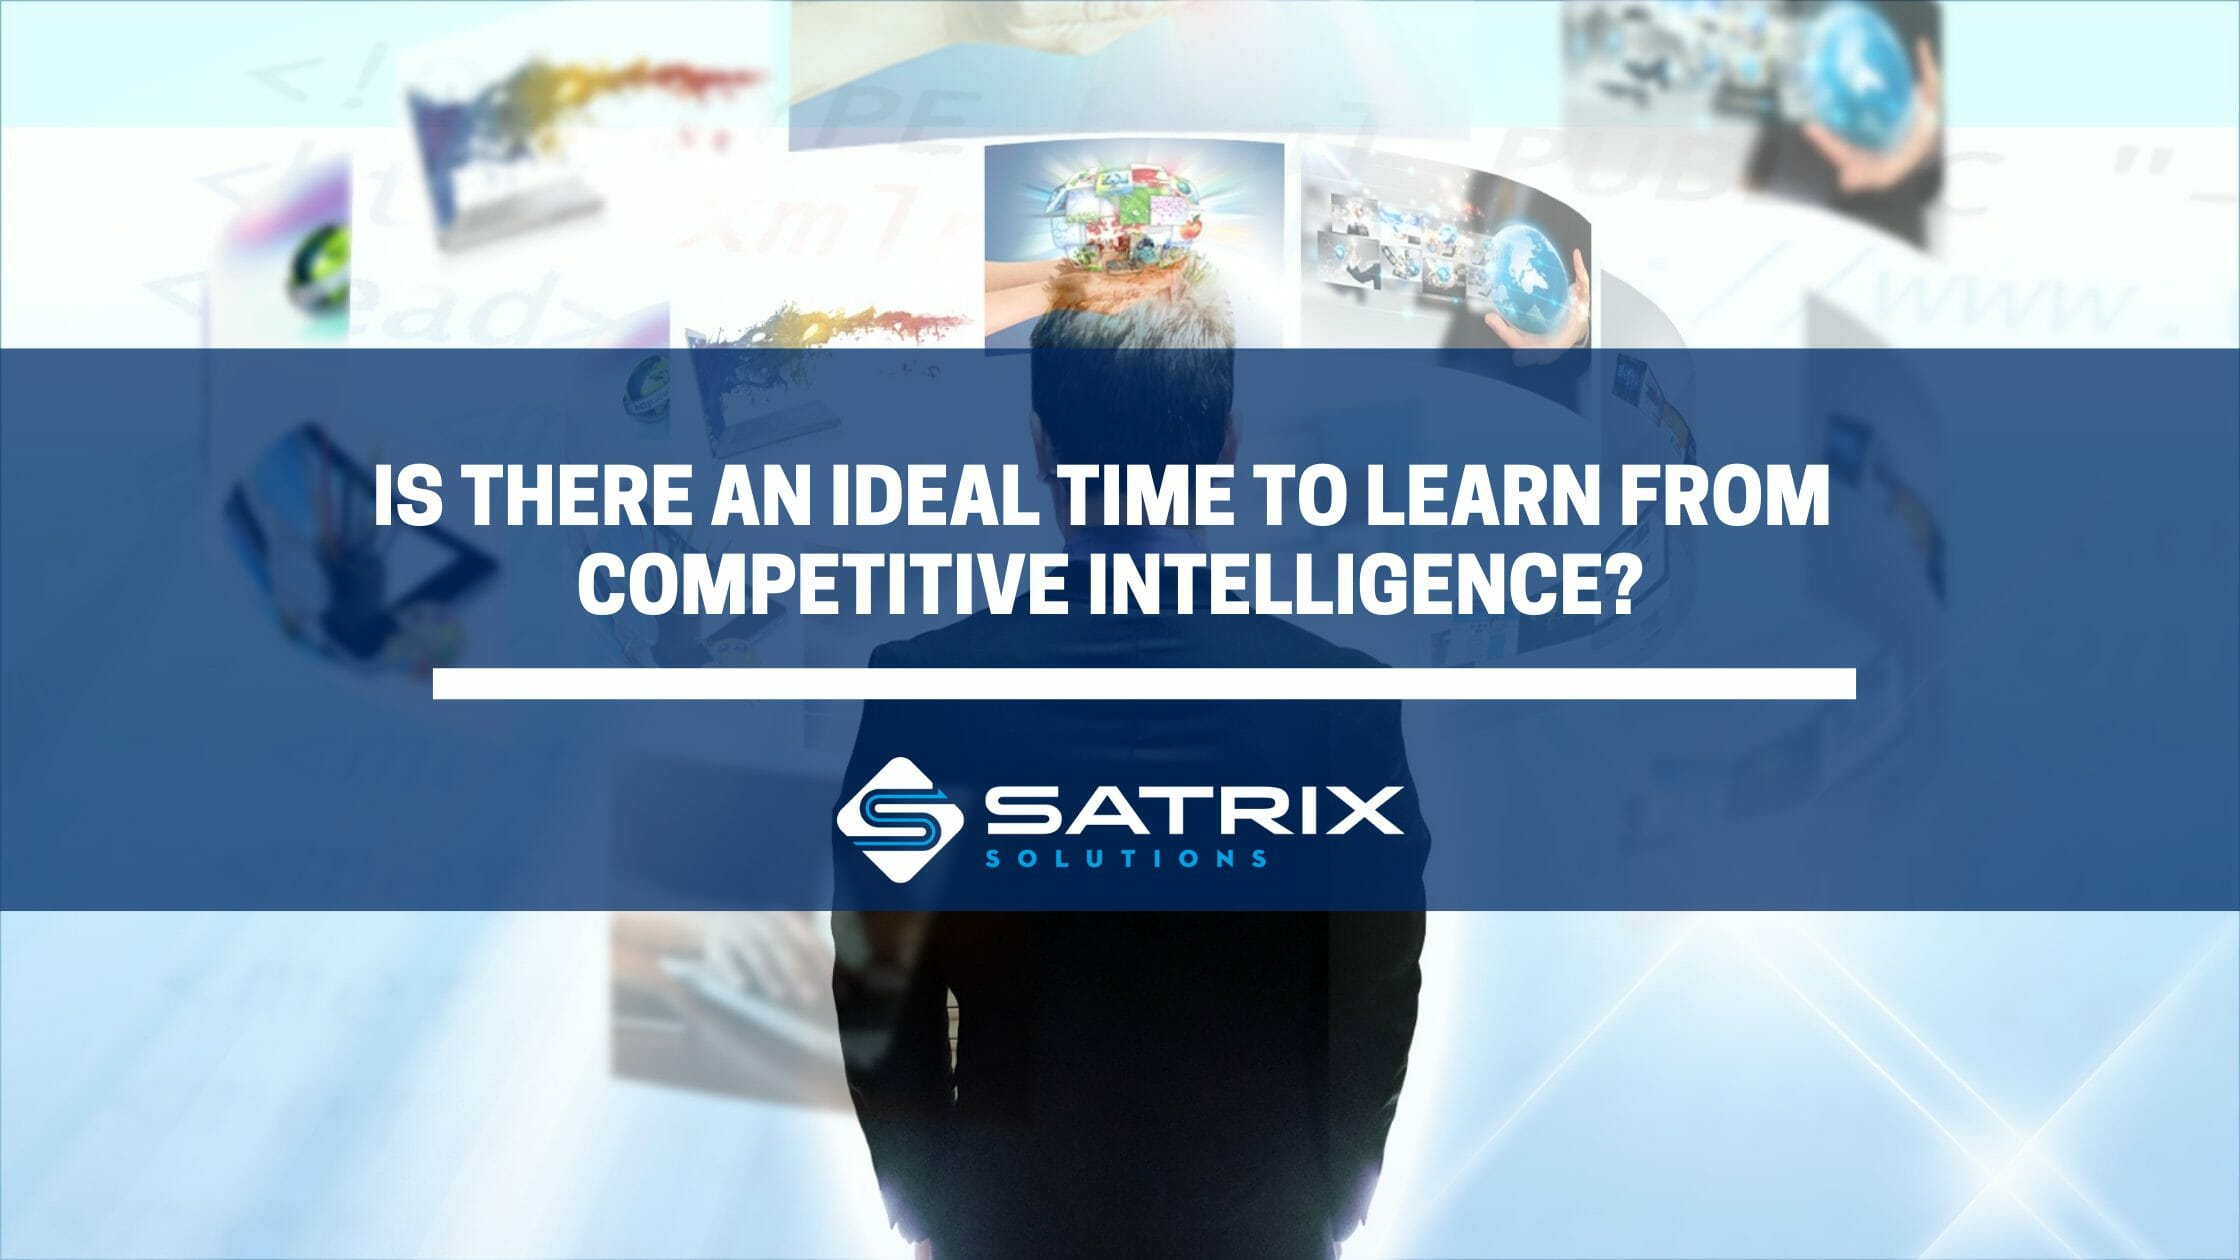 Is there an ideal time to learn from competitive intelligence?